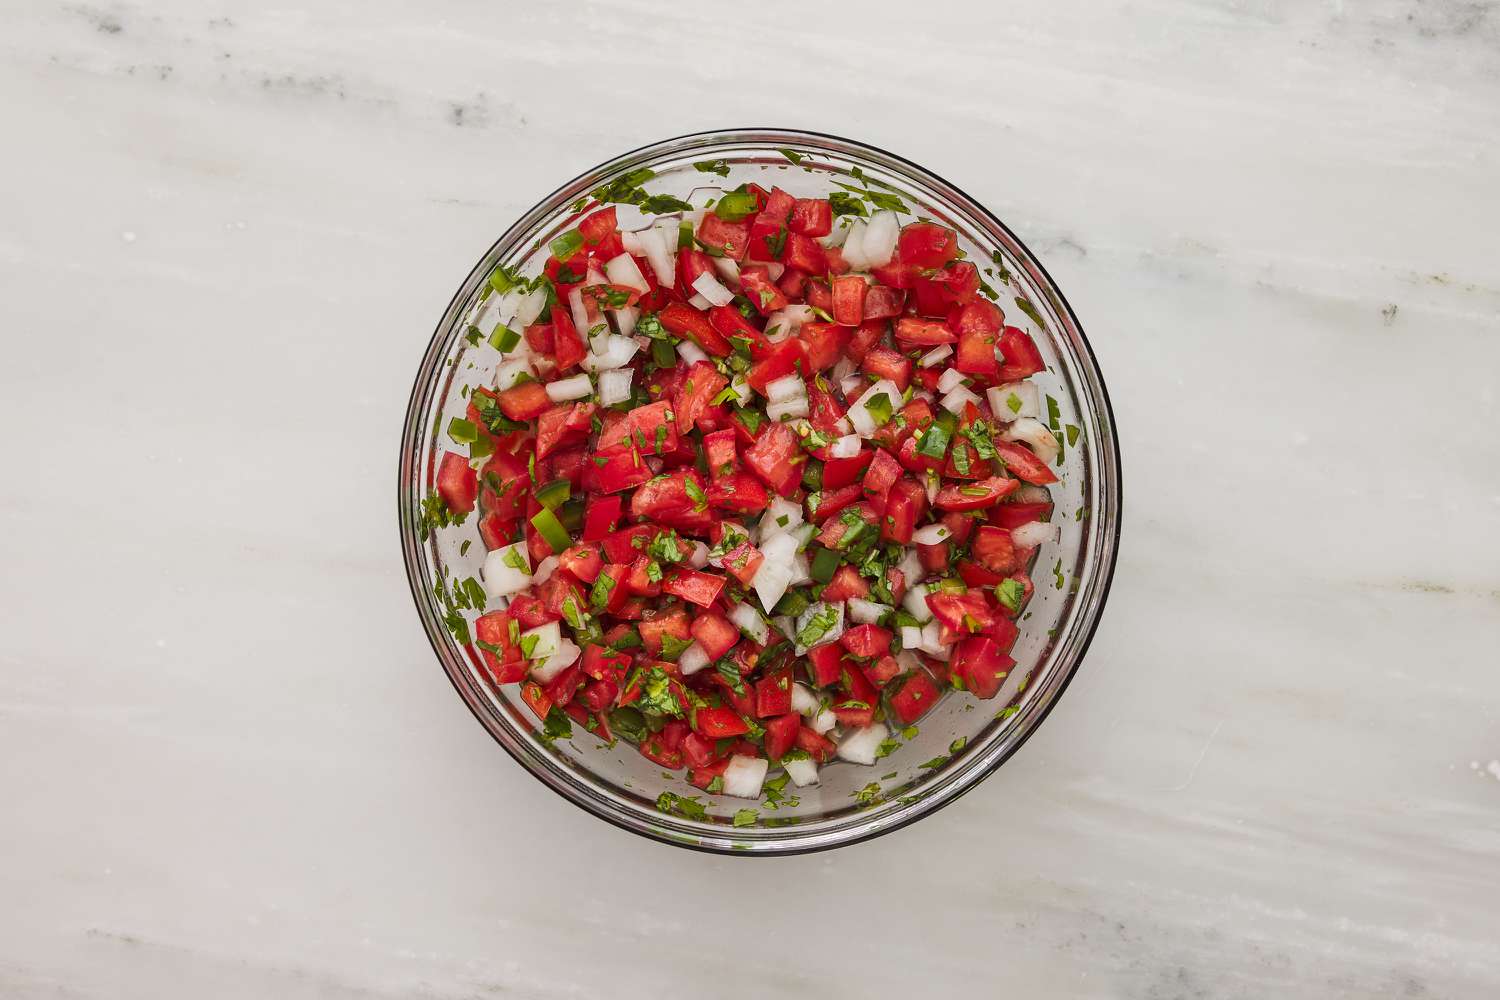 pico salsa ingredients combined in a bowl